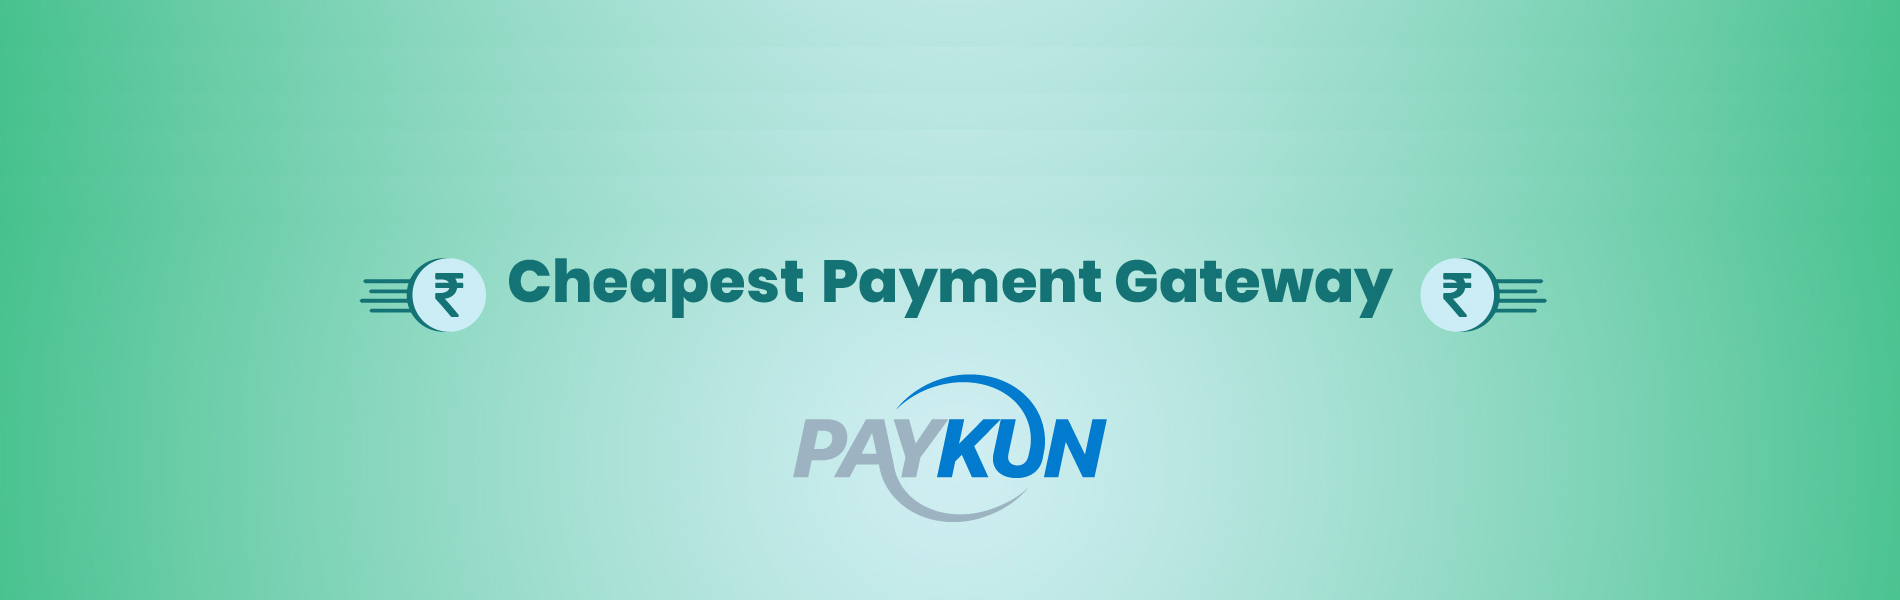 Cheapest Online Payment Gateway for Startup Business – PayKun